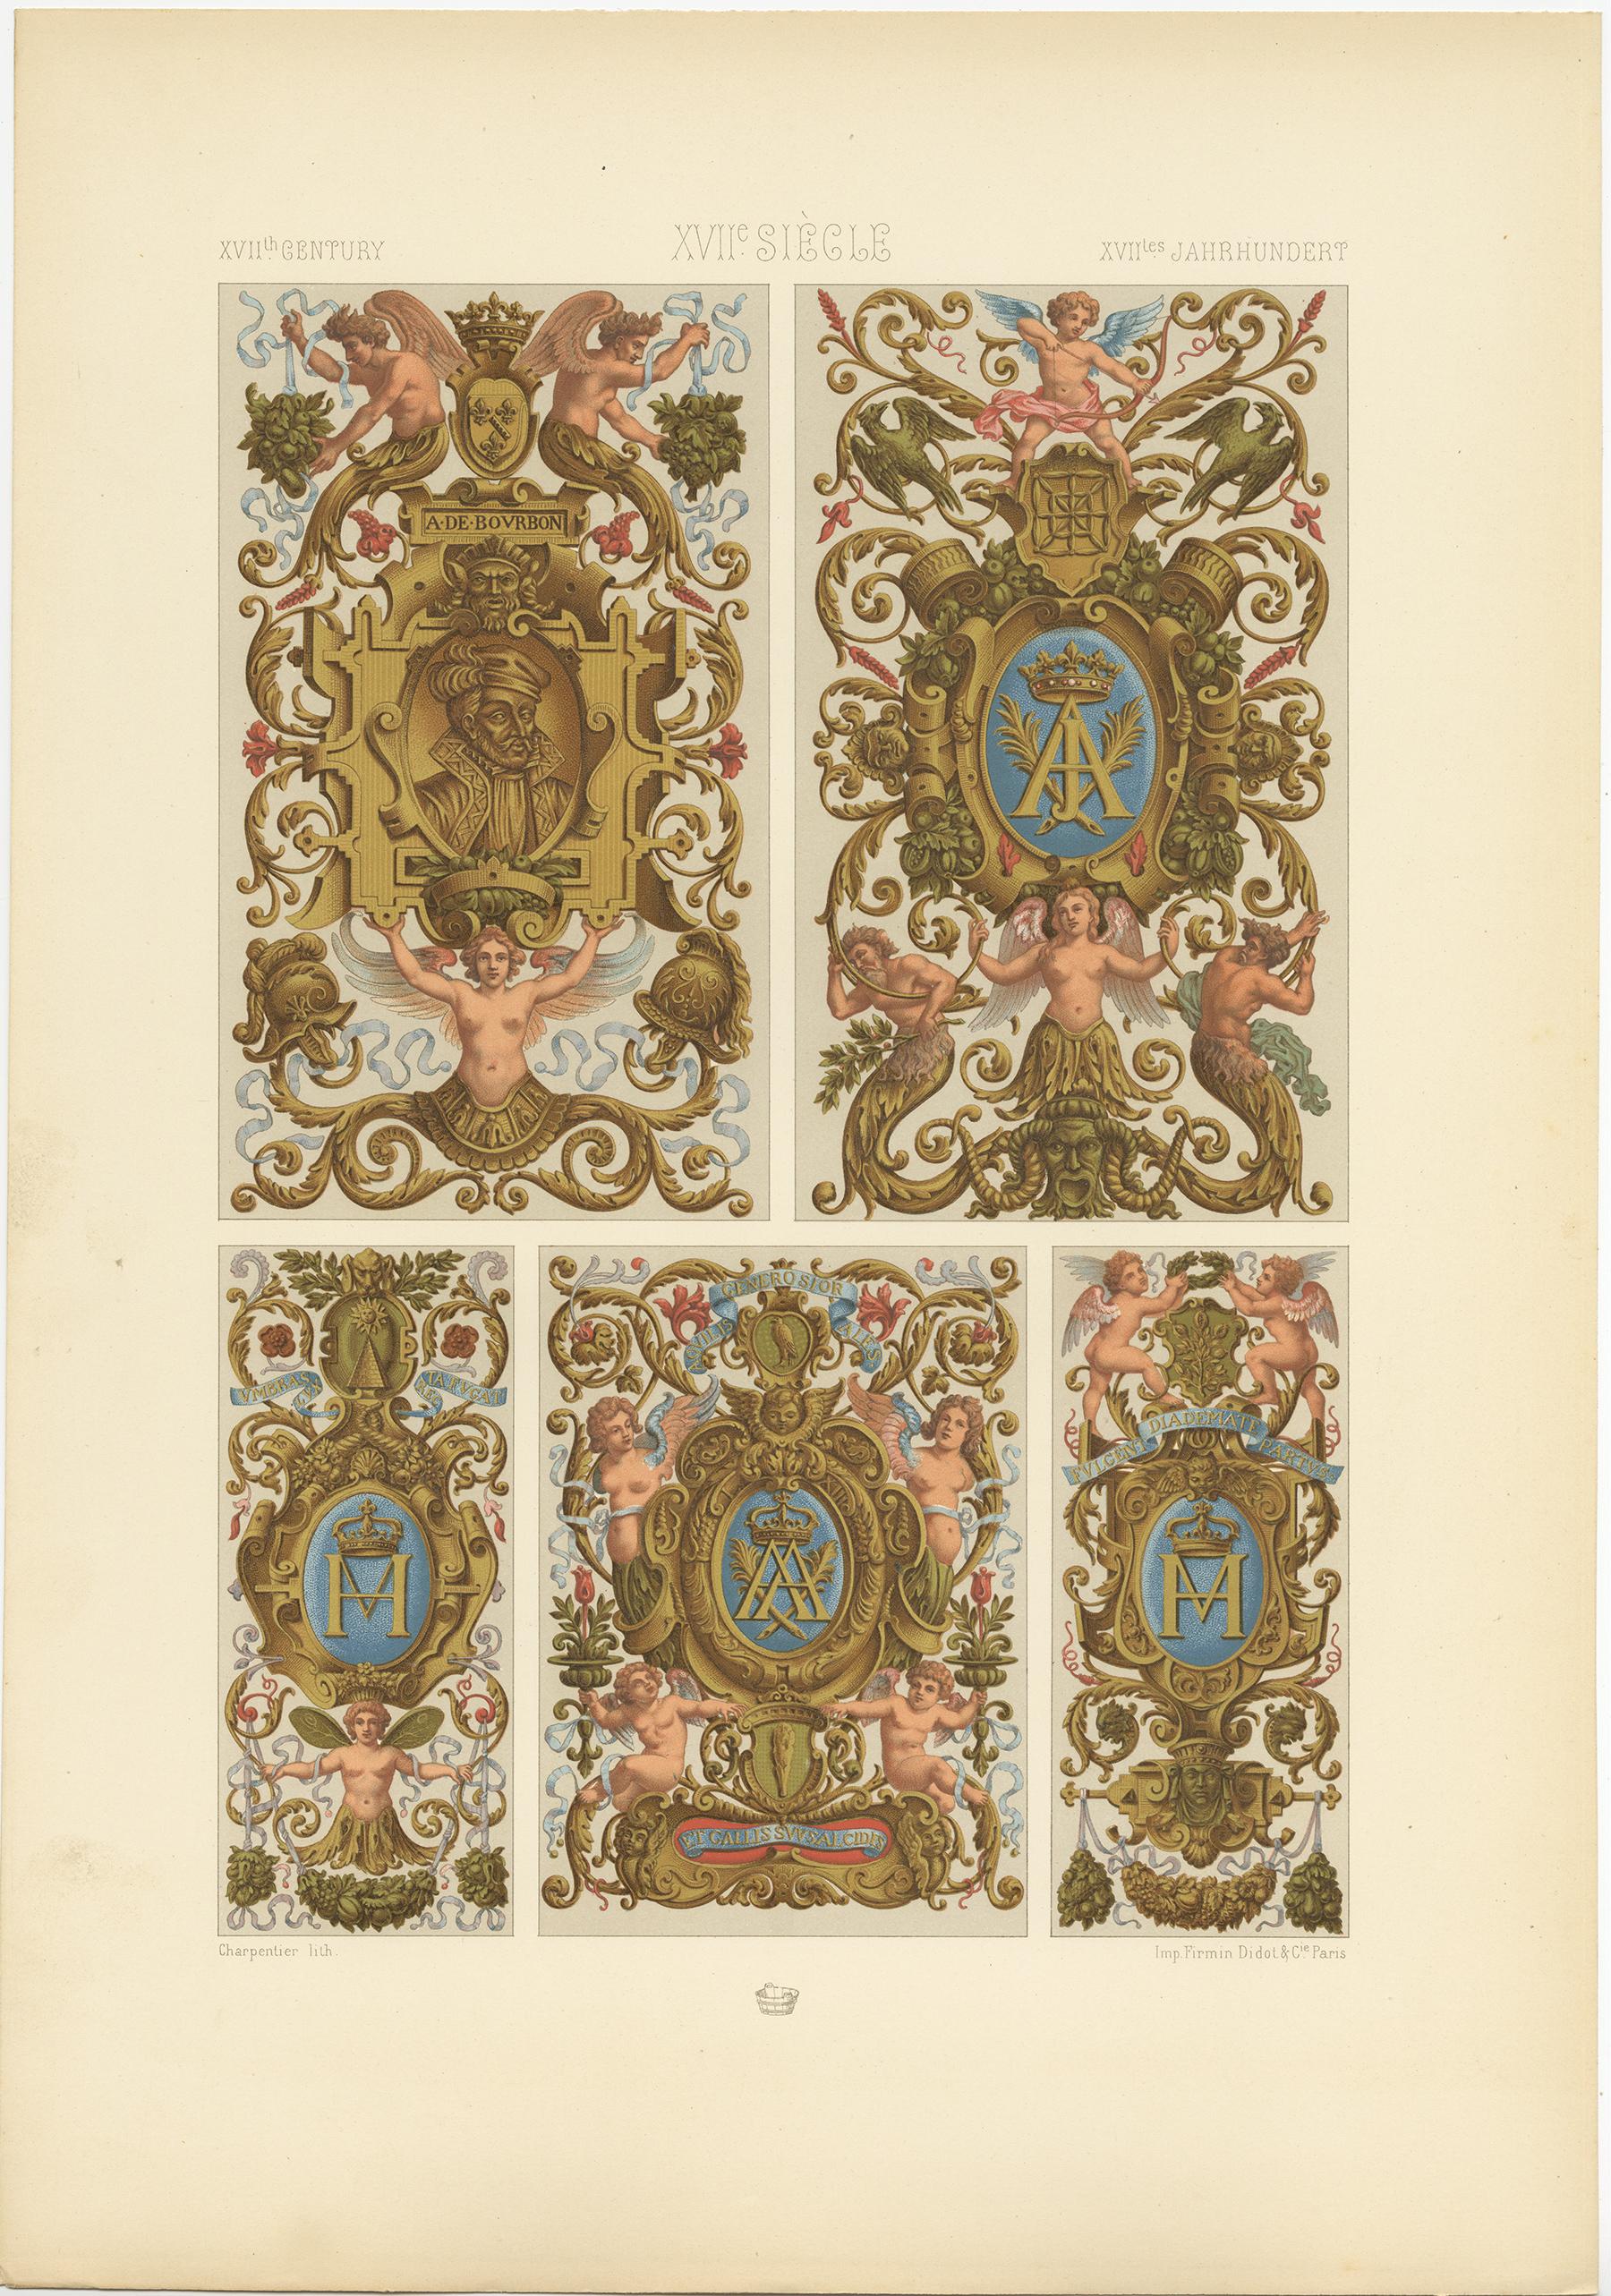 Antique print titled '17th Century - XVIIc Siècle - XVIILes Jahrhundert'. Chromolithograph of decorative paintings from the palace Fontainebleau ornaments. This print originates from 'l'Ornement Polychrome' by Auguste Racinet. Published circa 1890.